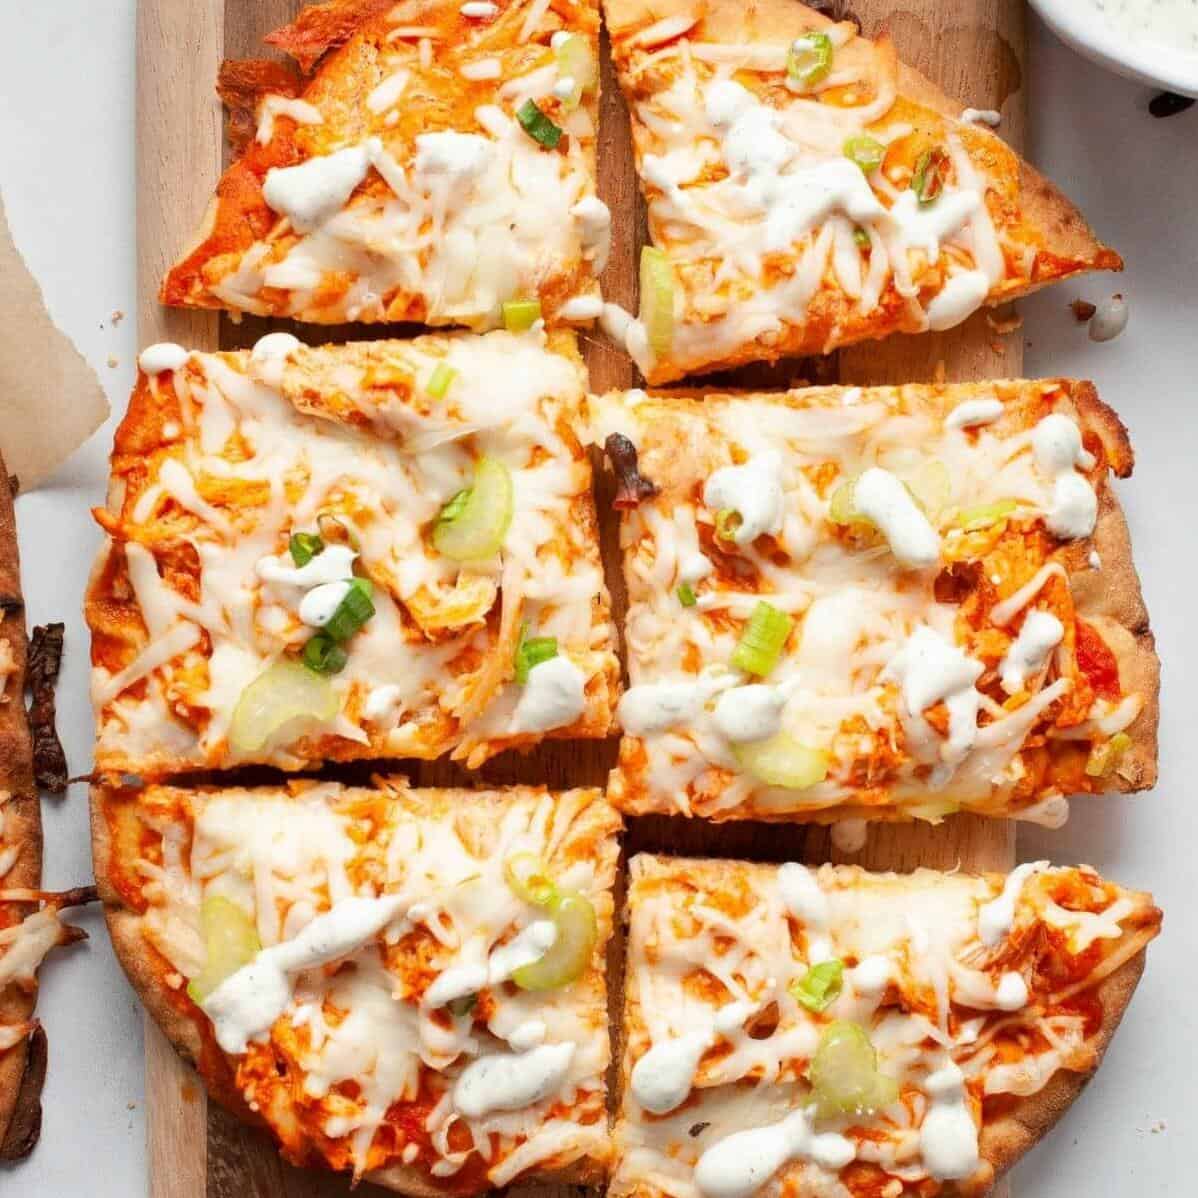  These pita pizzas are crispy, savory, and packed full of delicious toppings!